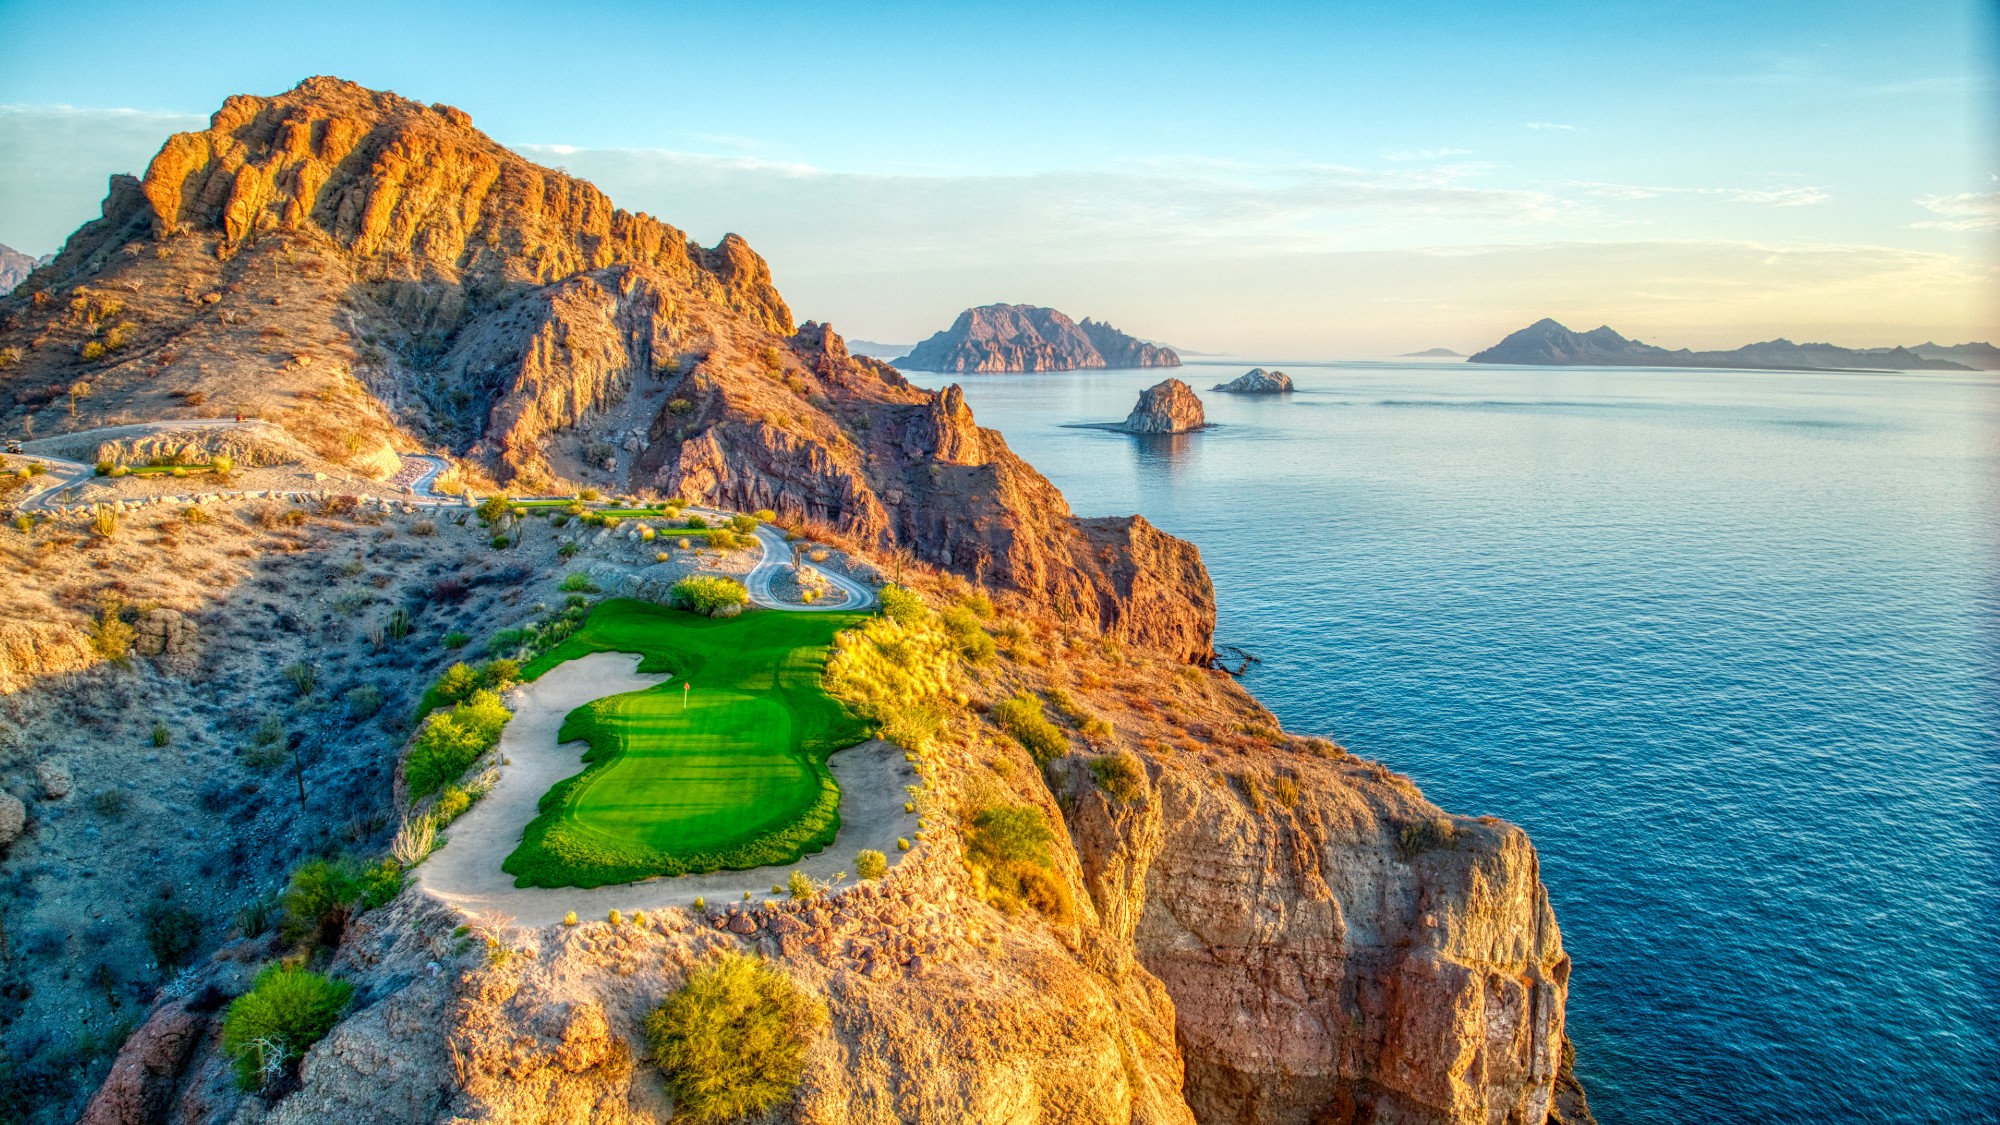  10 spectacular hotels for golfers that have just the right swing 